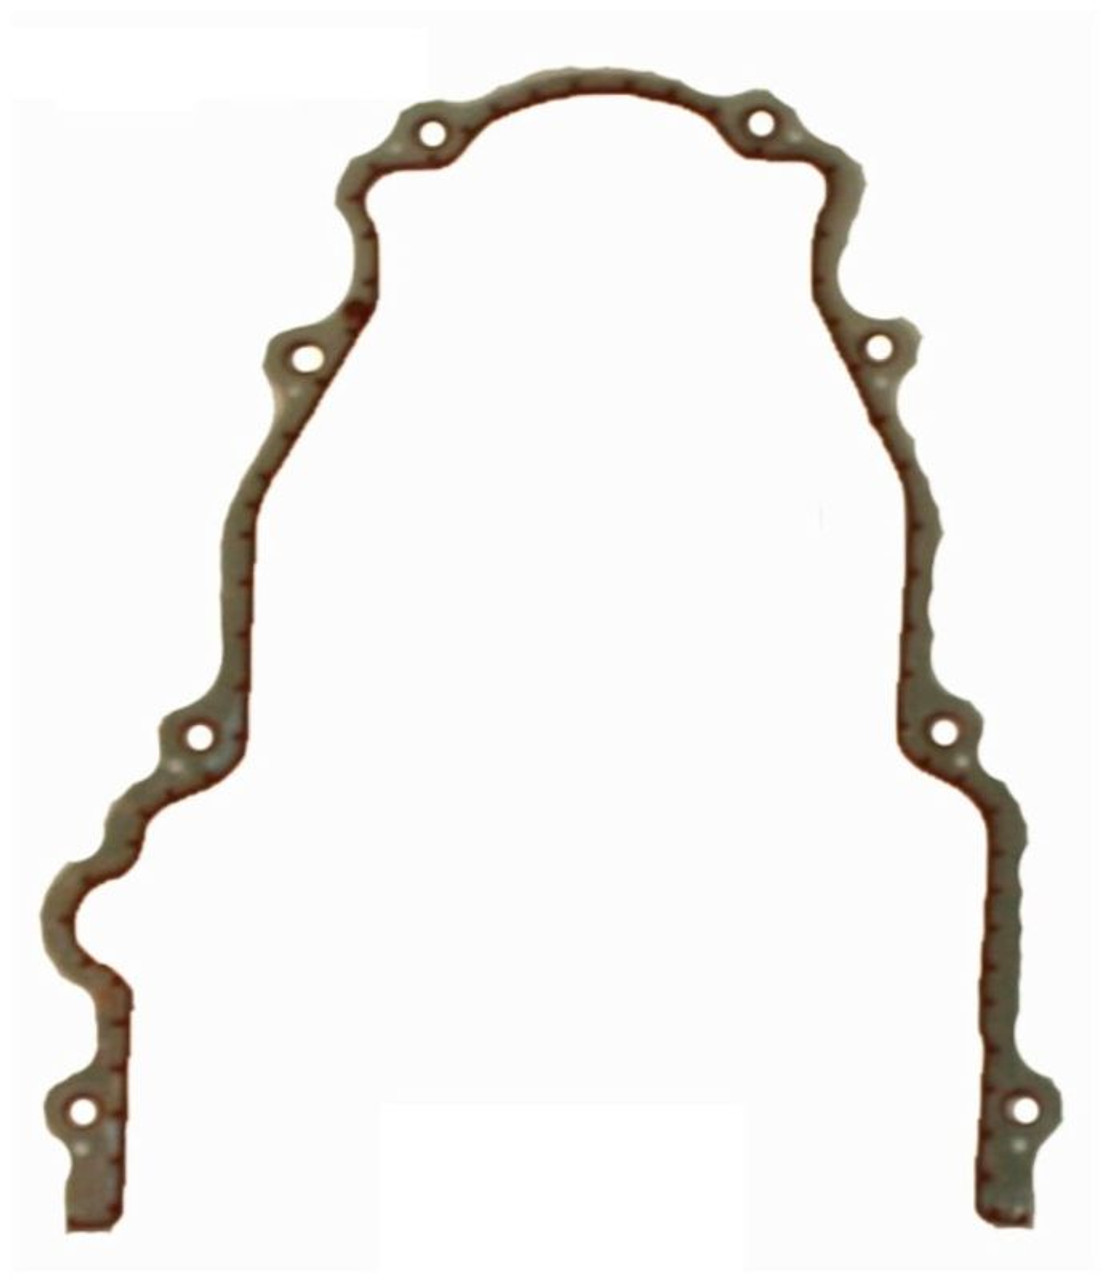 2013 Chevrolet Express 3500 4.8L Engine Timing Cover Gasket TCG293-A -823